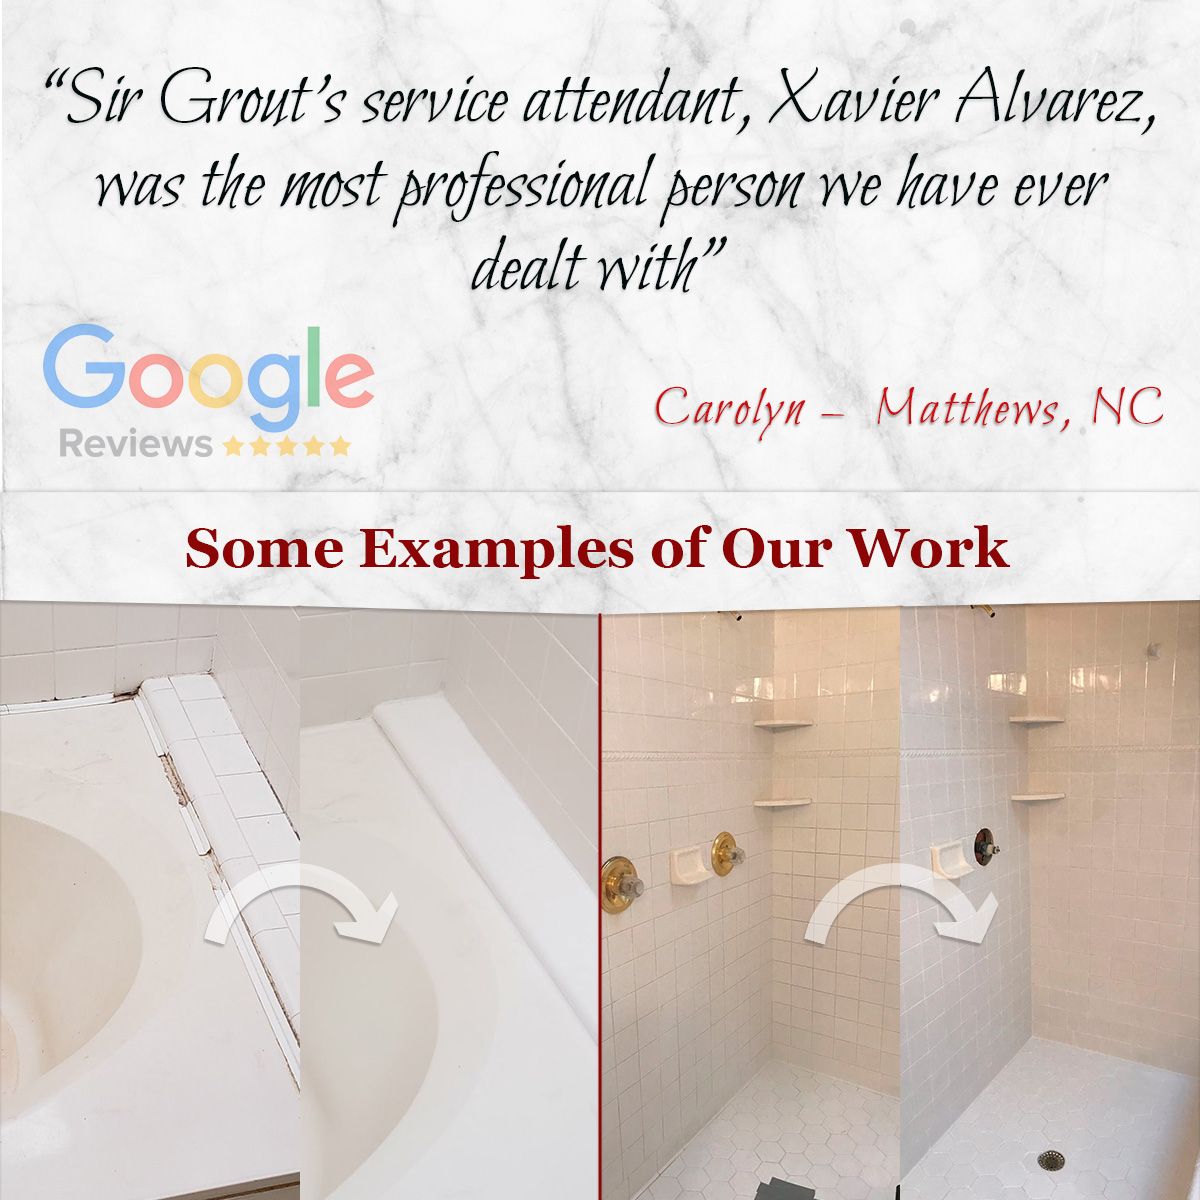 Sir Grout's service attendant, Xavier Alvarez, was the most professional person we have ever dealt with.